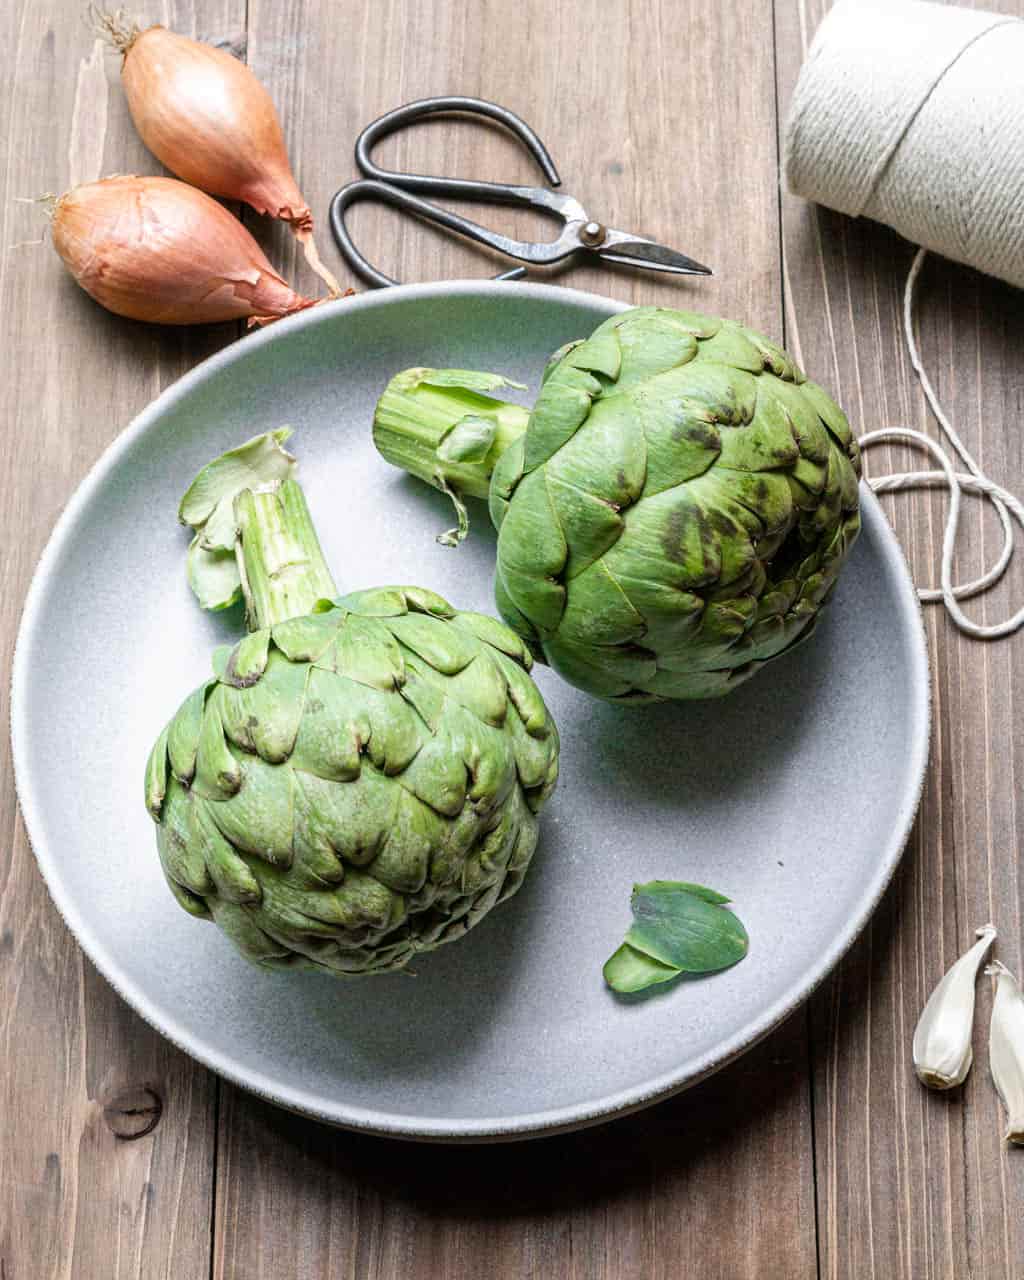 Two Artichokes on a Plate